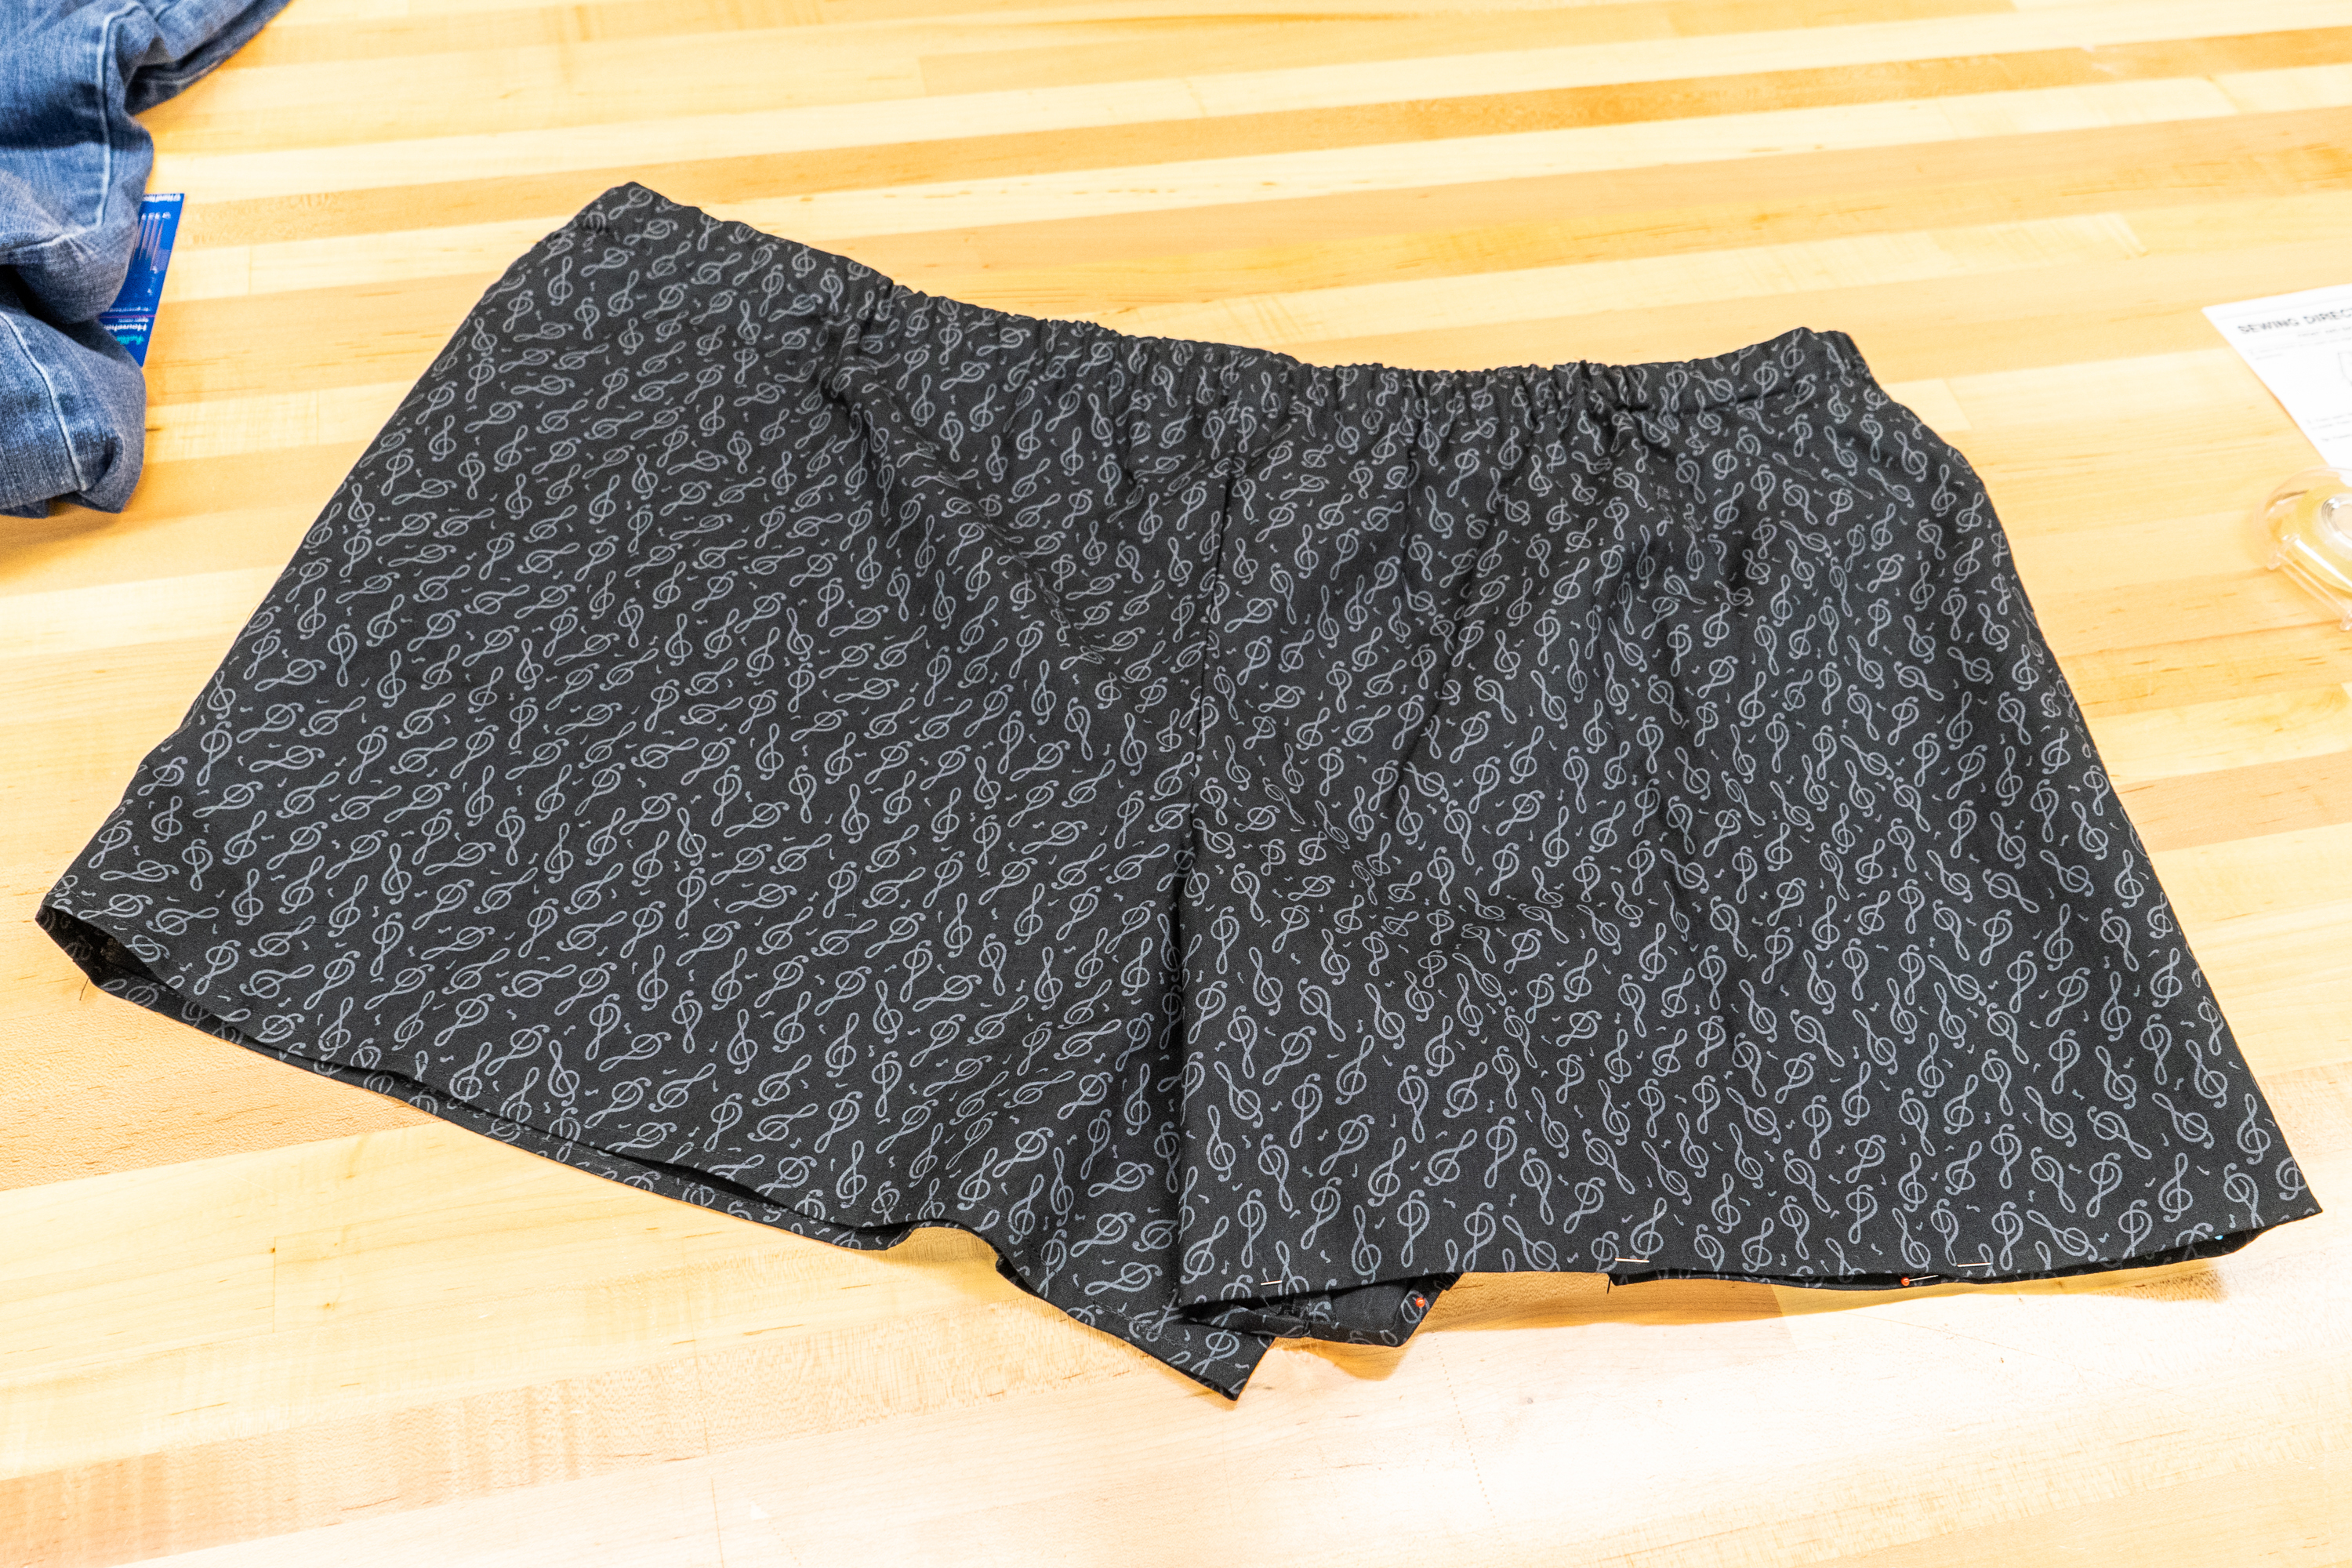 Black shorts with a musical note pattern lie on a wood tabletop